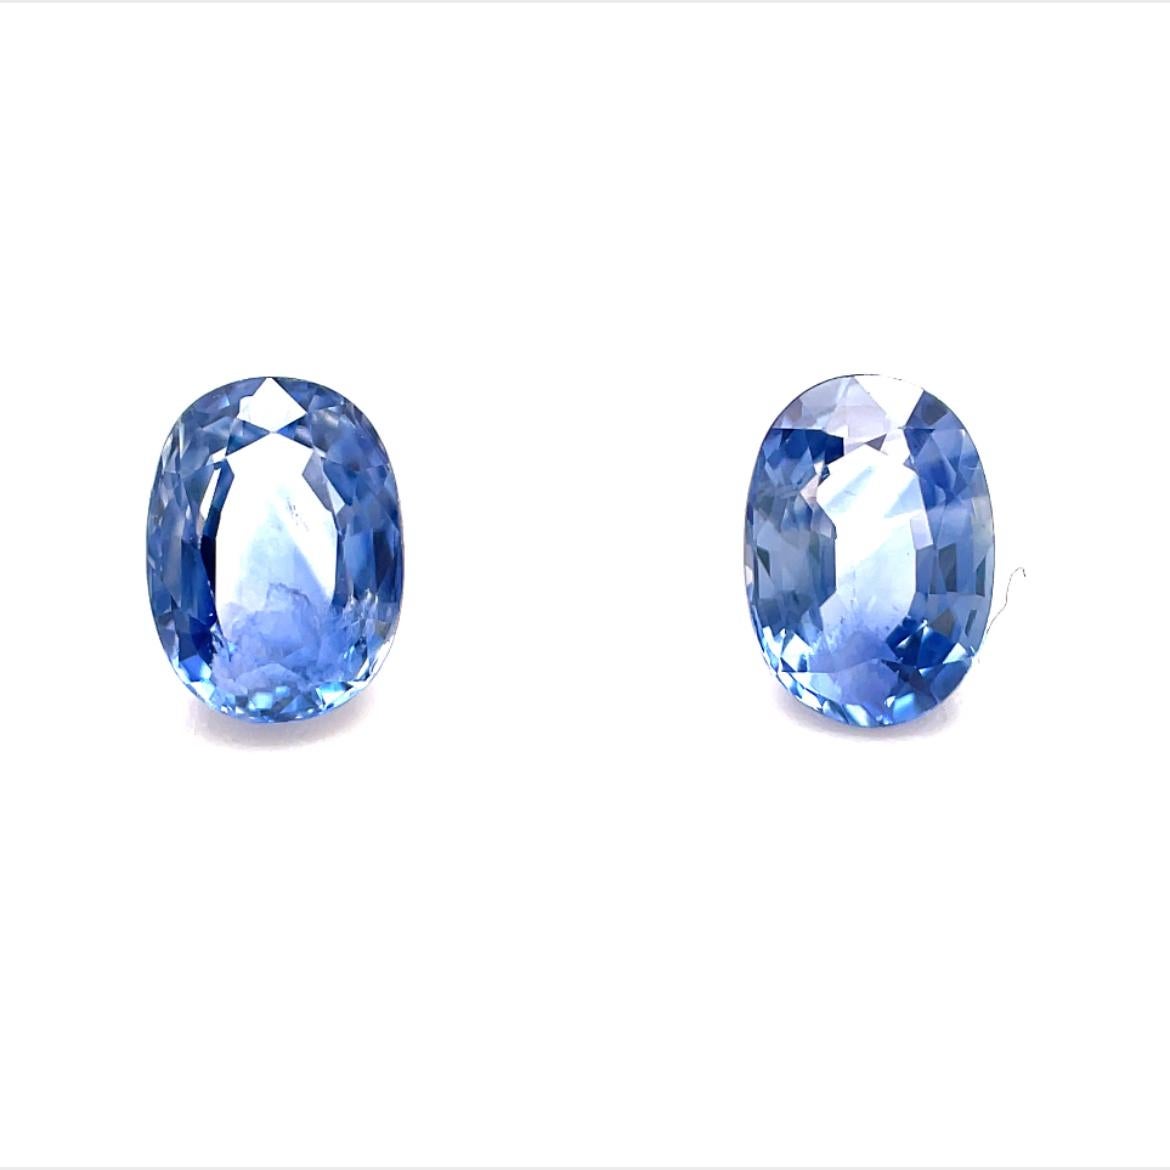 Artisan 2.03 Carat Total Blue Sapphires,  Pair of Unset Oval Gemstones for Earrings For Sale